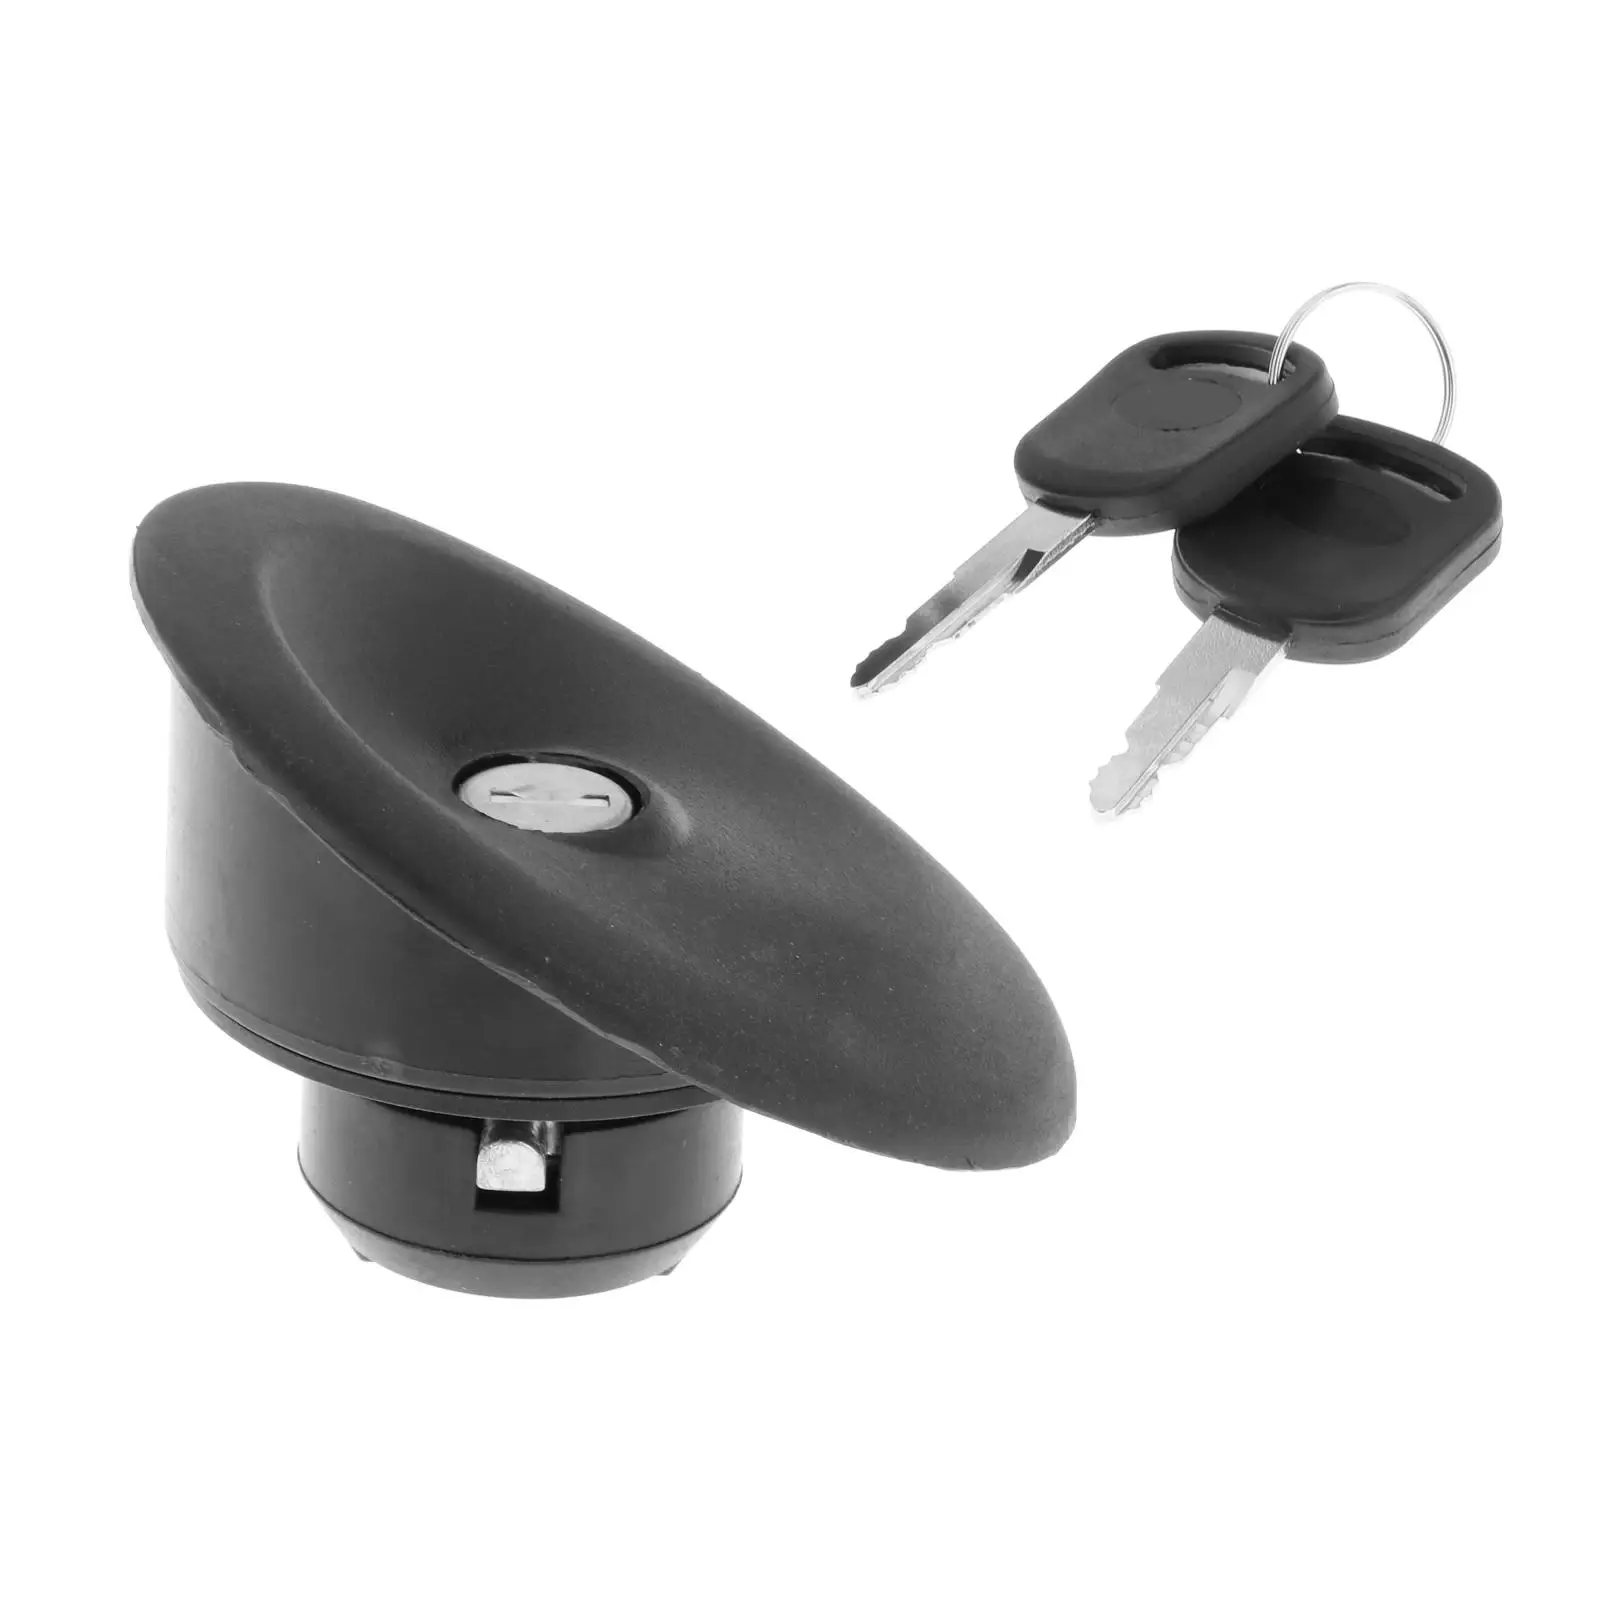 Fuel  Caps Come with Two Keys  Transit 1994 1995 19997 1998 1999 2000 3966745 Black Car 